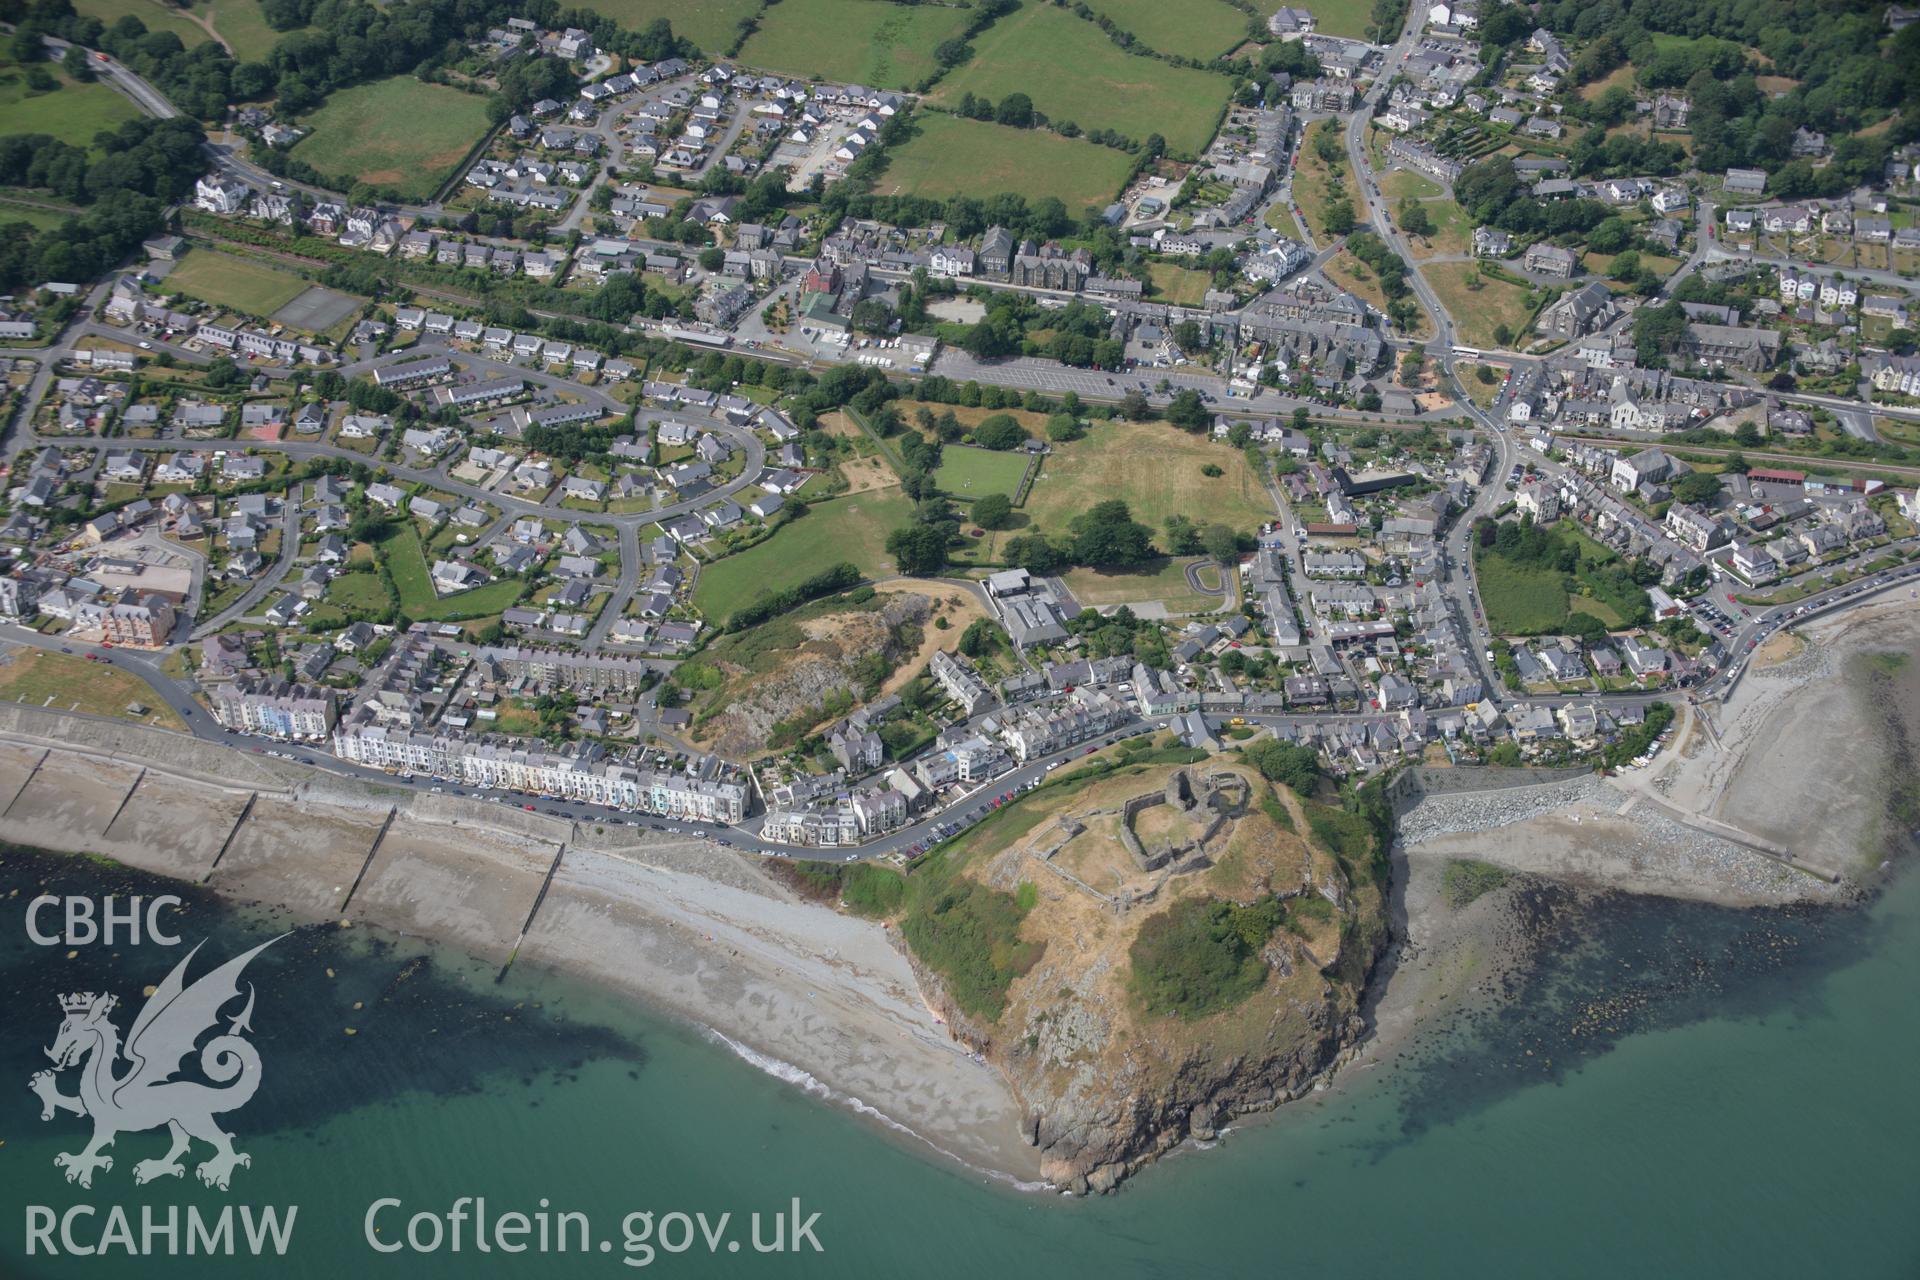 RCAHMW colour oblique aerial photograph of Criccieth Castle. Taken on 25 July 2006 by Toby Driver.